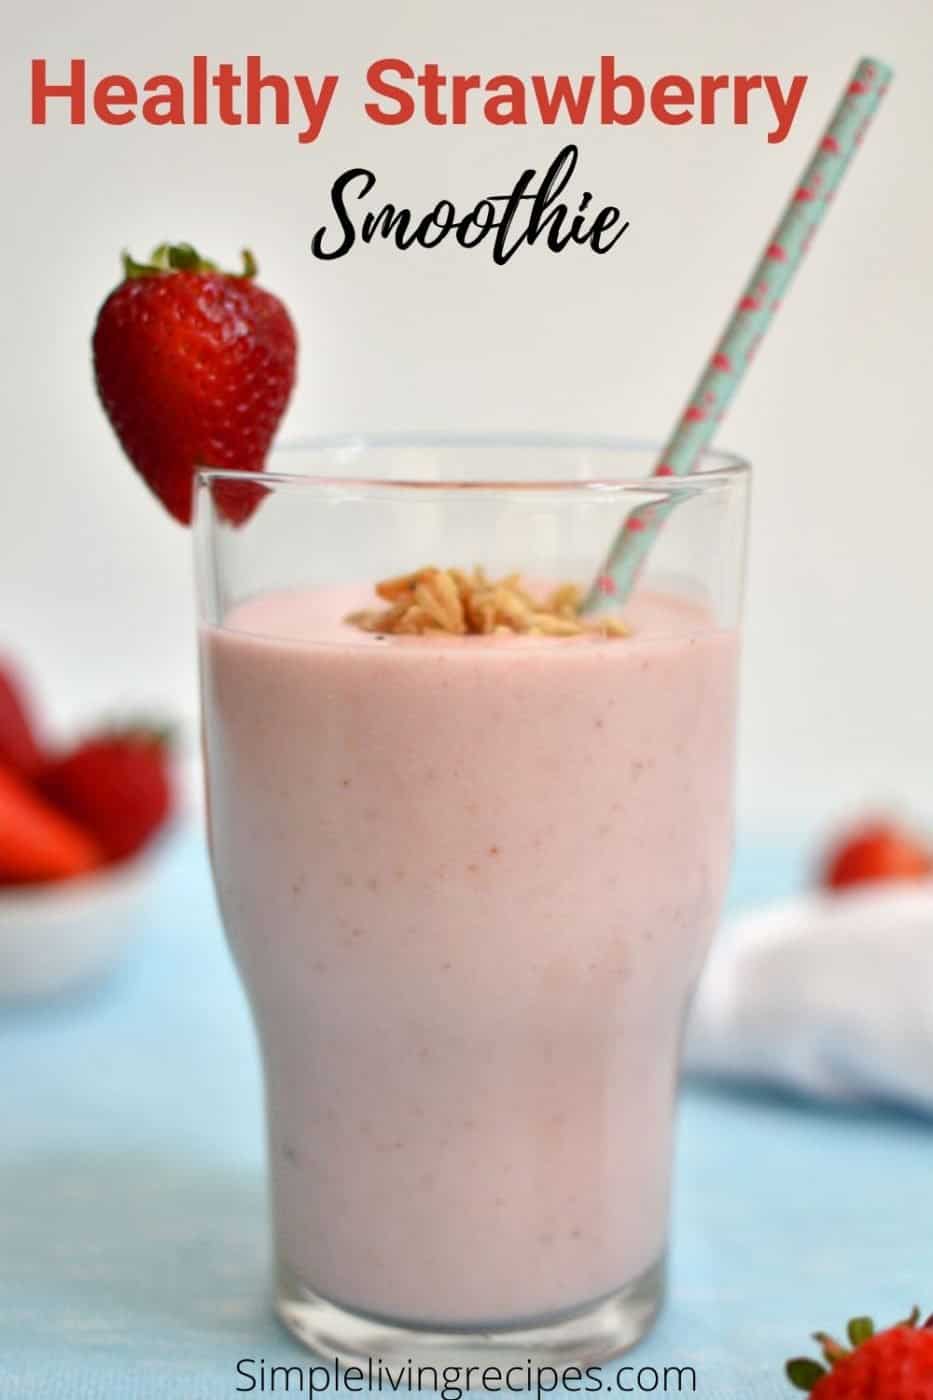 Healthy strawberry smoothie Pinterest pin image